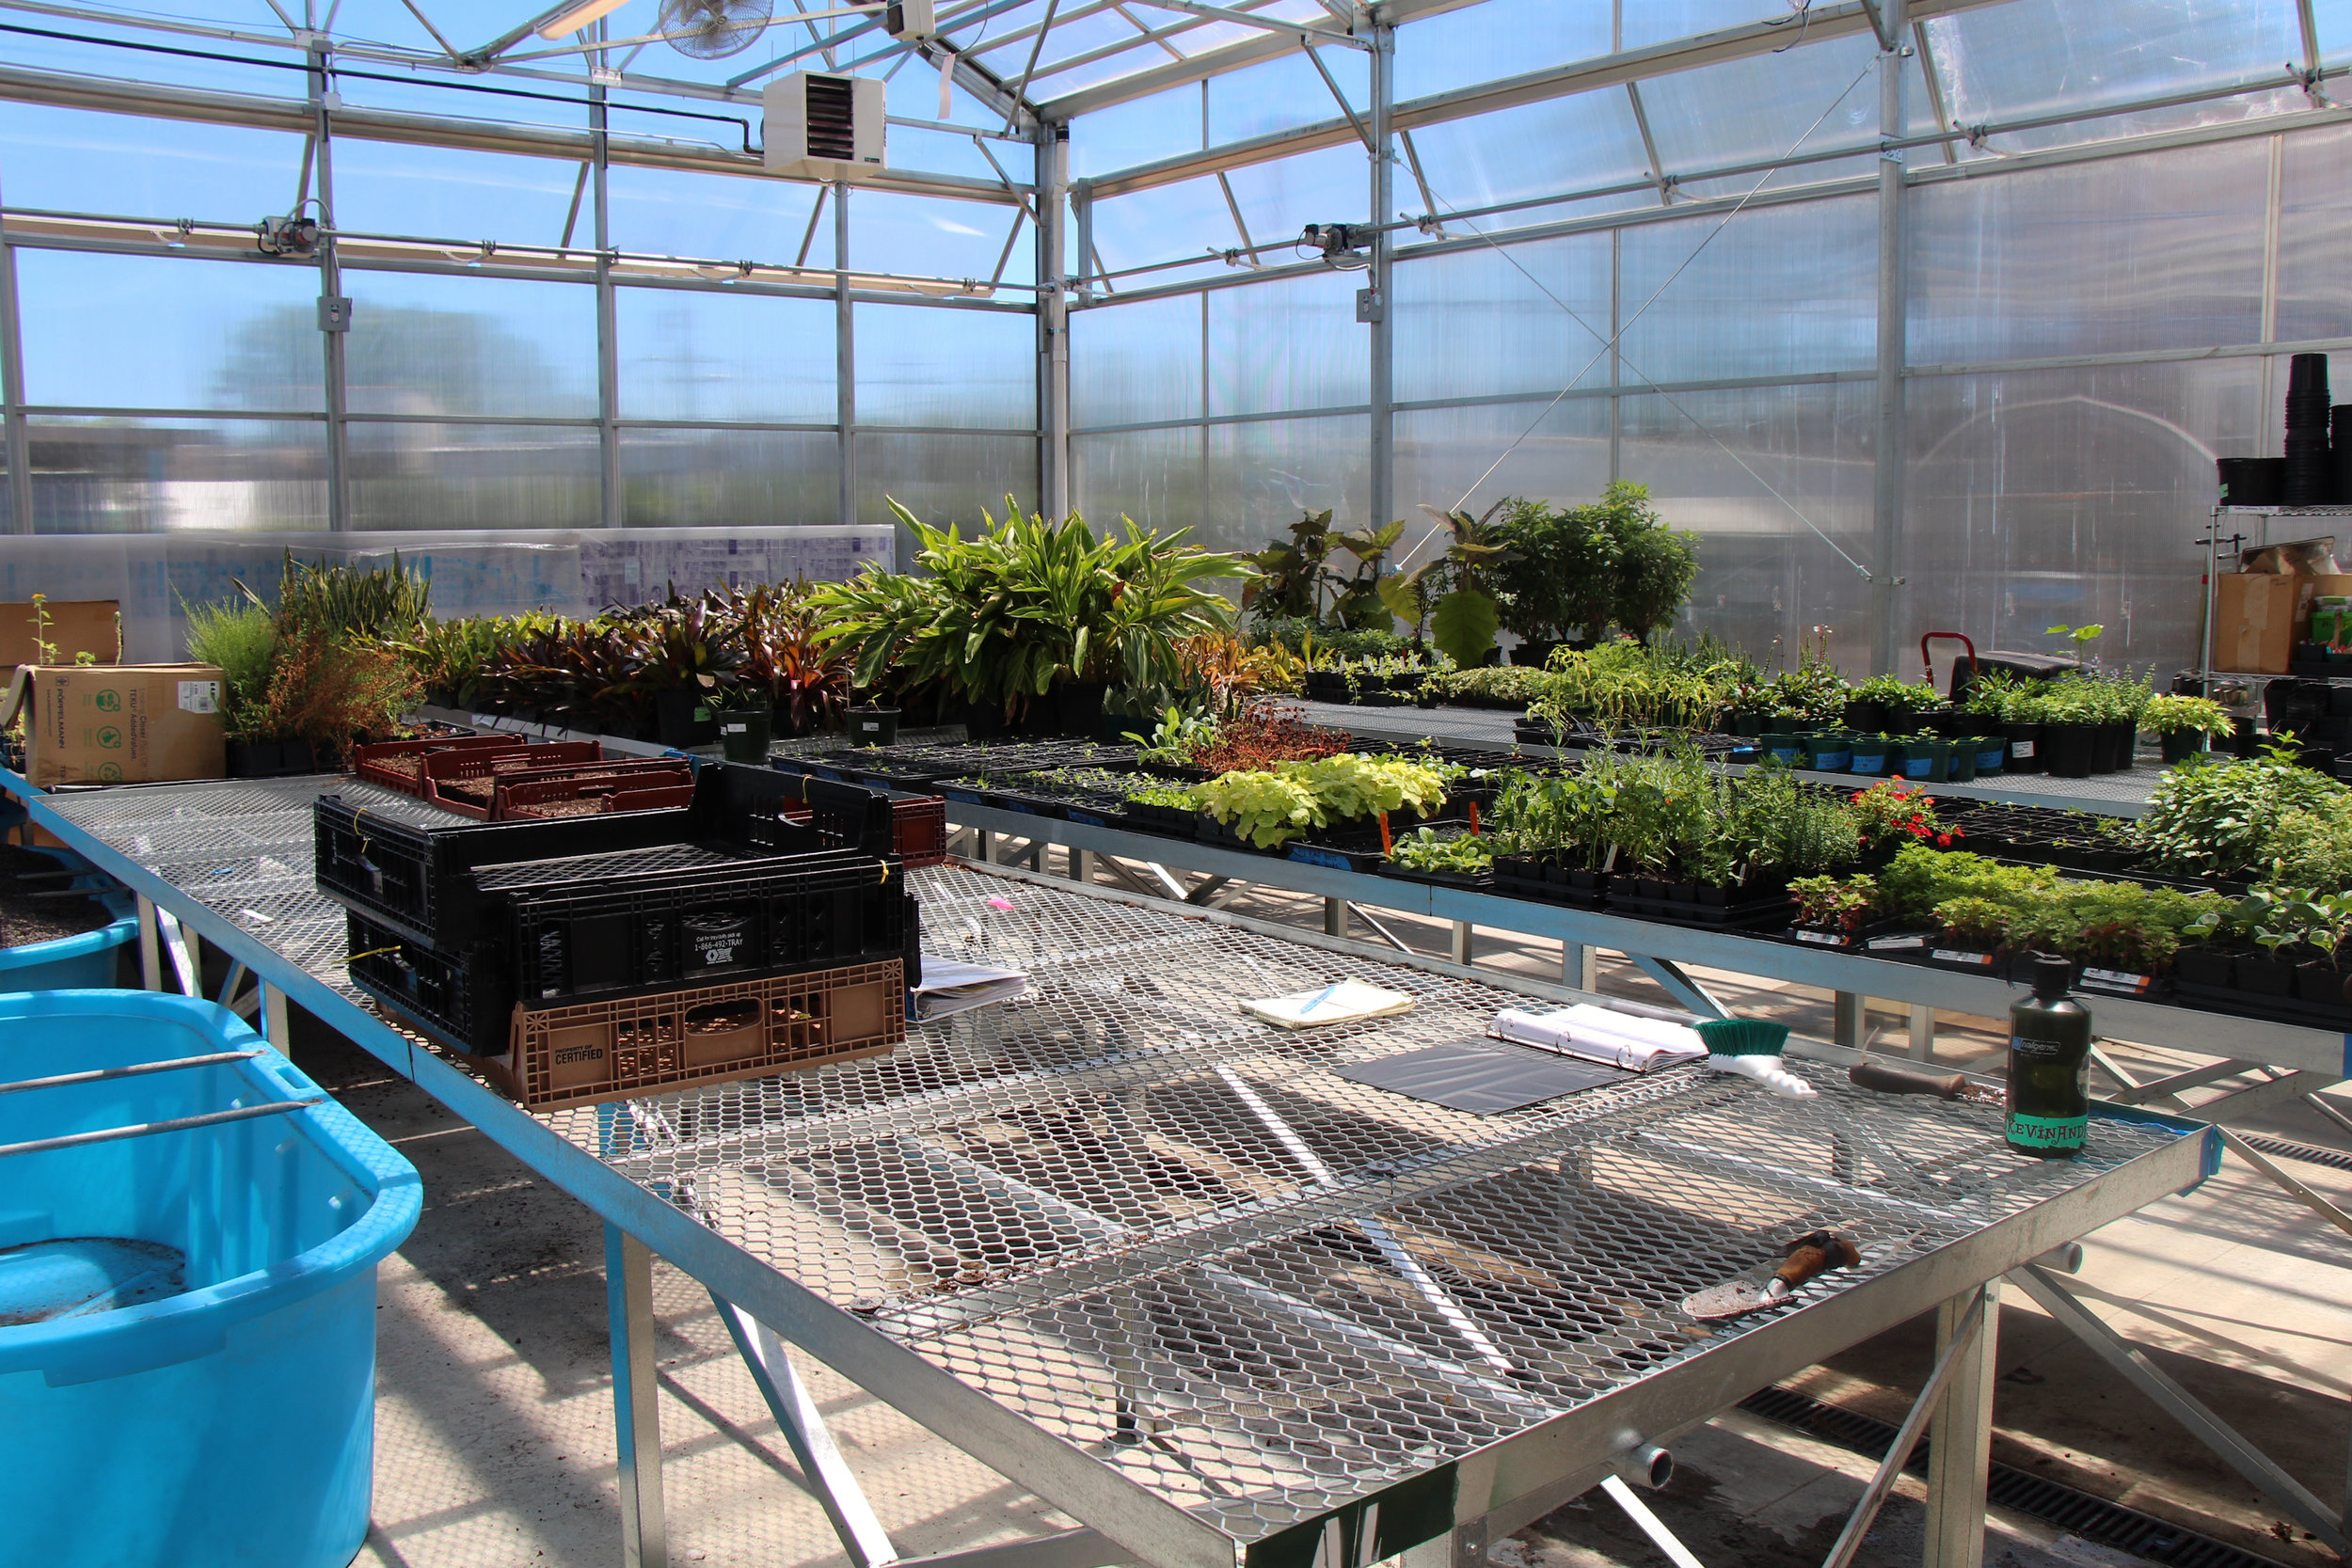 The Greenhouse is a 7,300 sq. ft.room where the growing processes start.